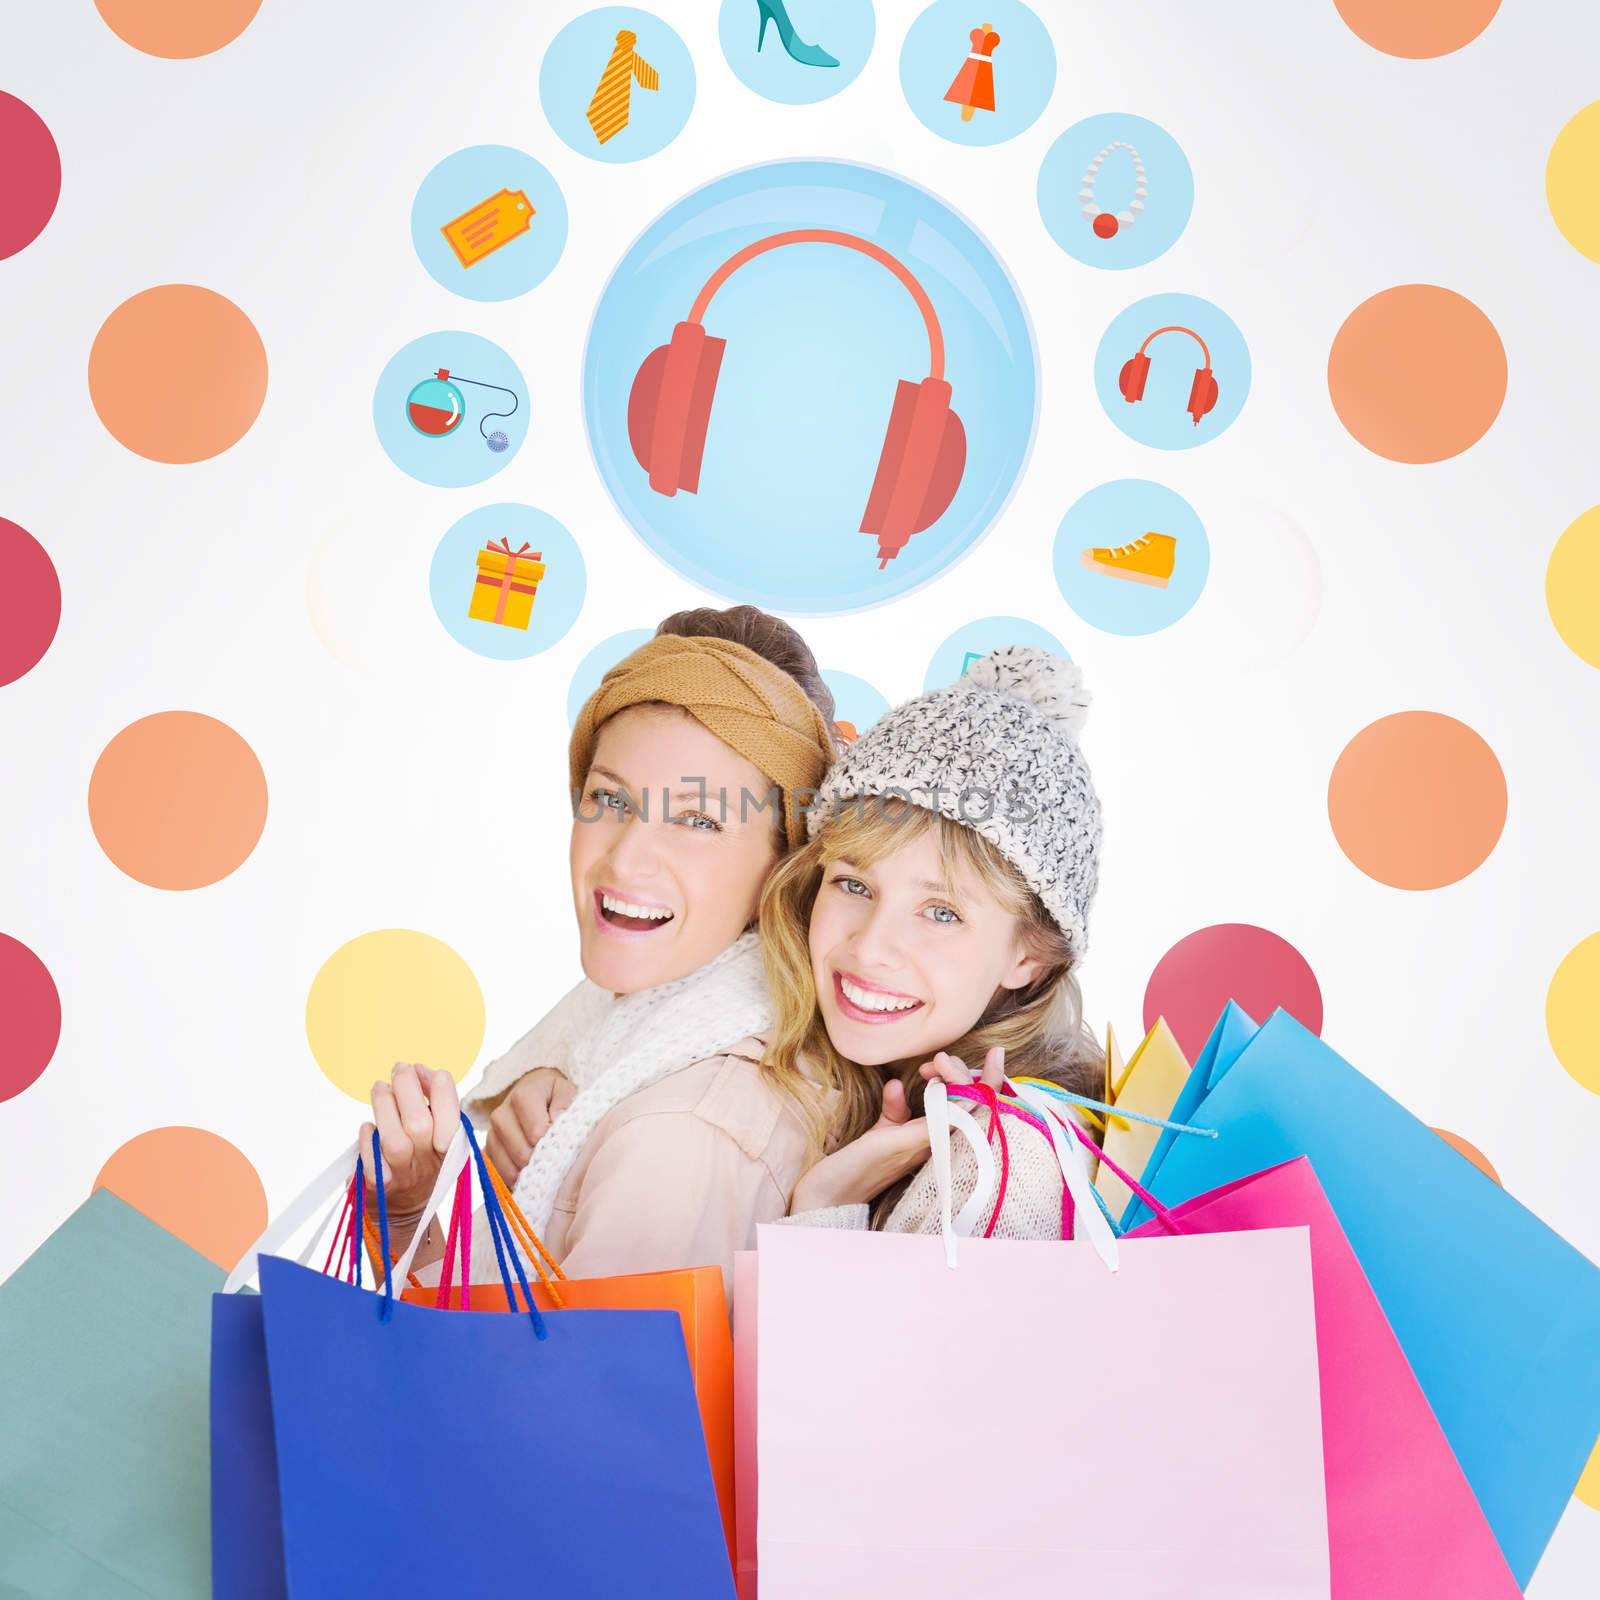 Beautiful women holding shopping bags looking at camera  against colorful polka dot pattern 